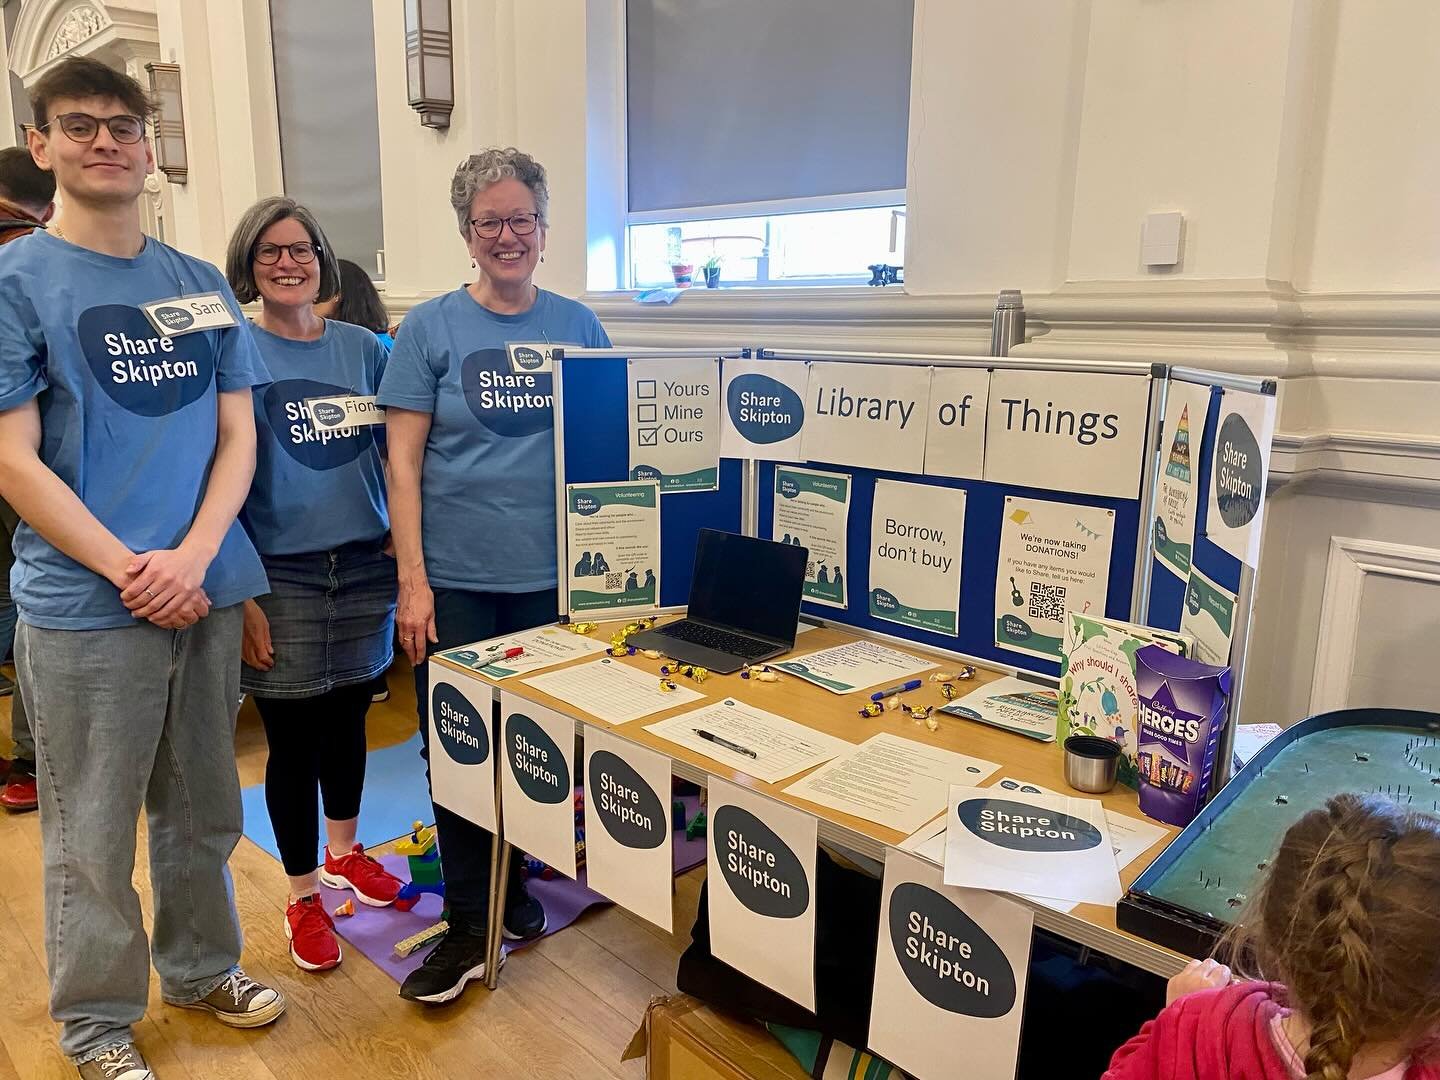 #SkiptonEcoDay 2024 was really busy! Thanks to everyone who stopped by to chat, play with the games, sign up for our newsletter, offer to donate something, or volunteer. We loved talking to you! And thanks to @skiptonrotary for organising. #libraryof